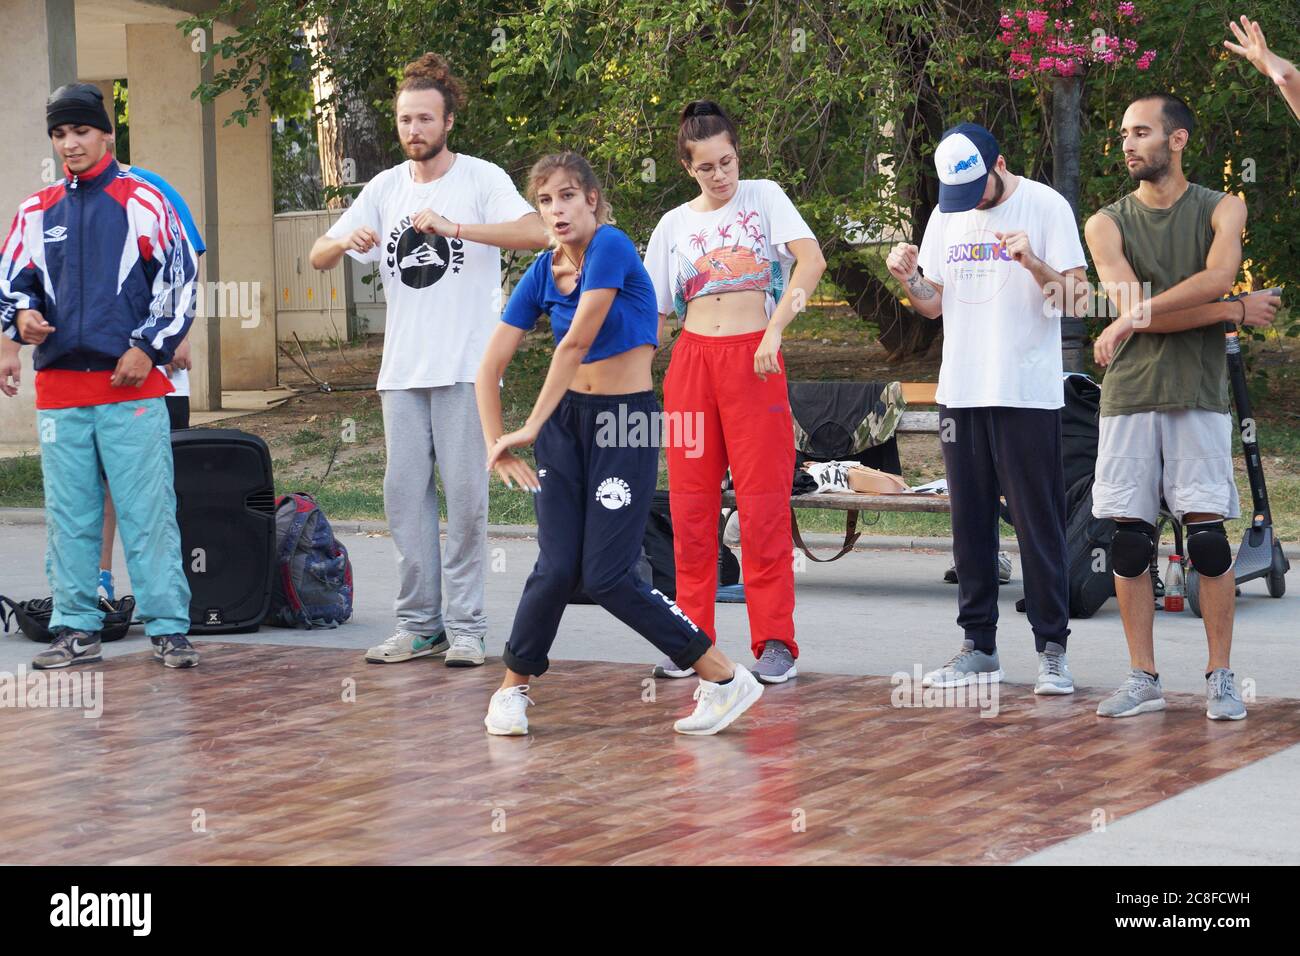 Varna, Bulgaria - July, 19, 2020: young street dancers and musicians show performance Stock Photo